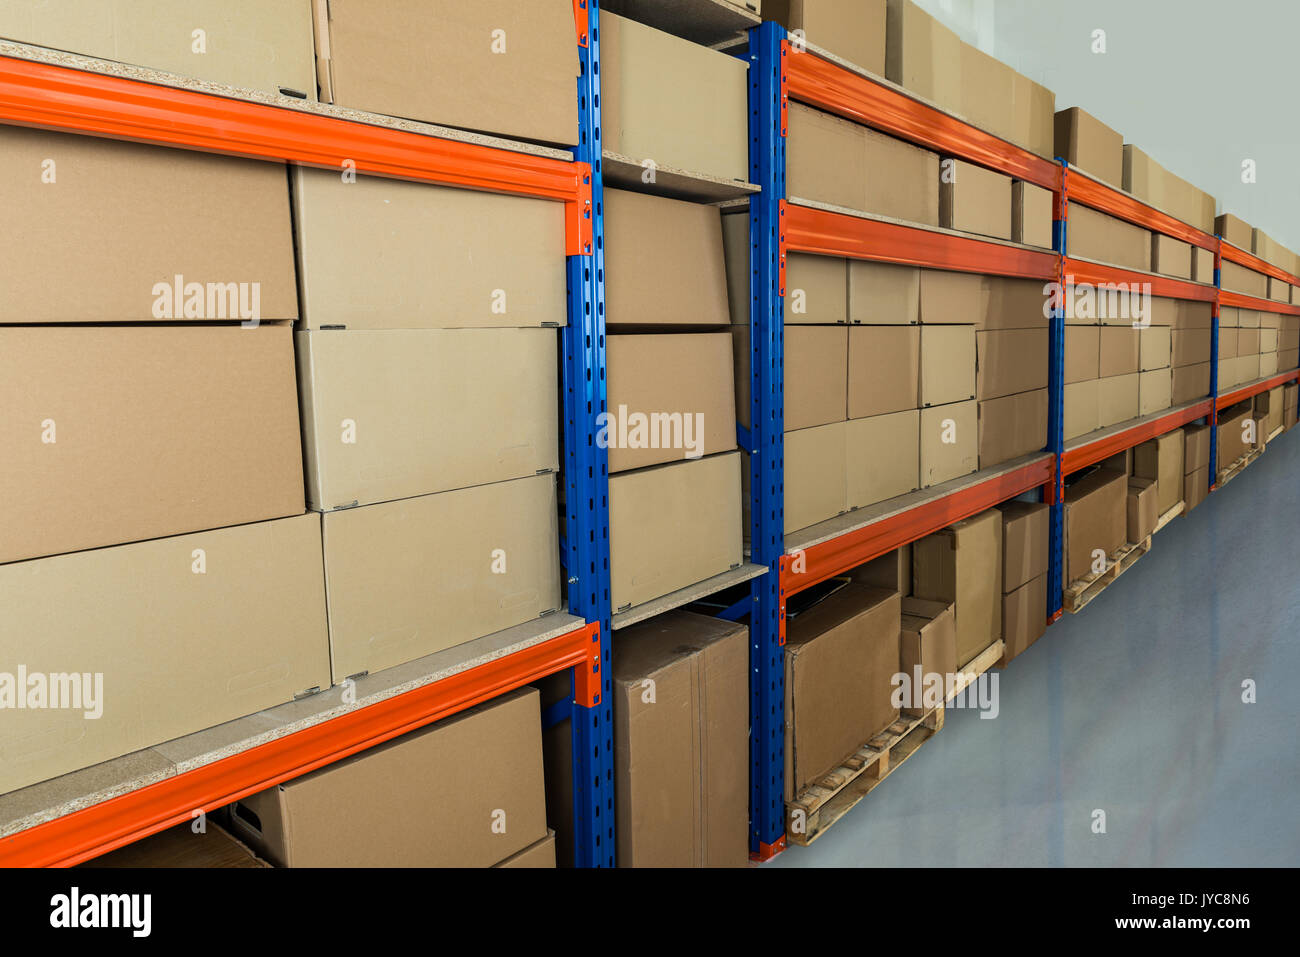 Cardboard Boxes On Shelves In Distribution Warehouse Stock Photo